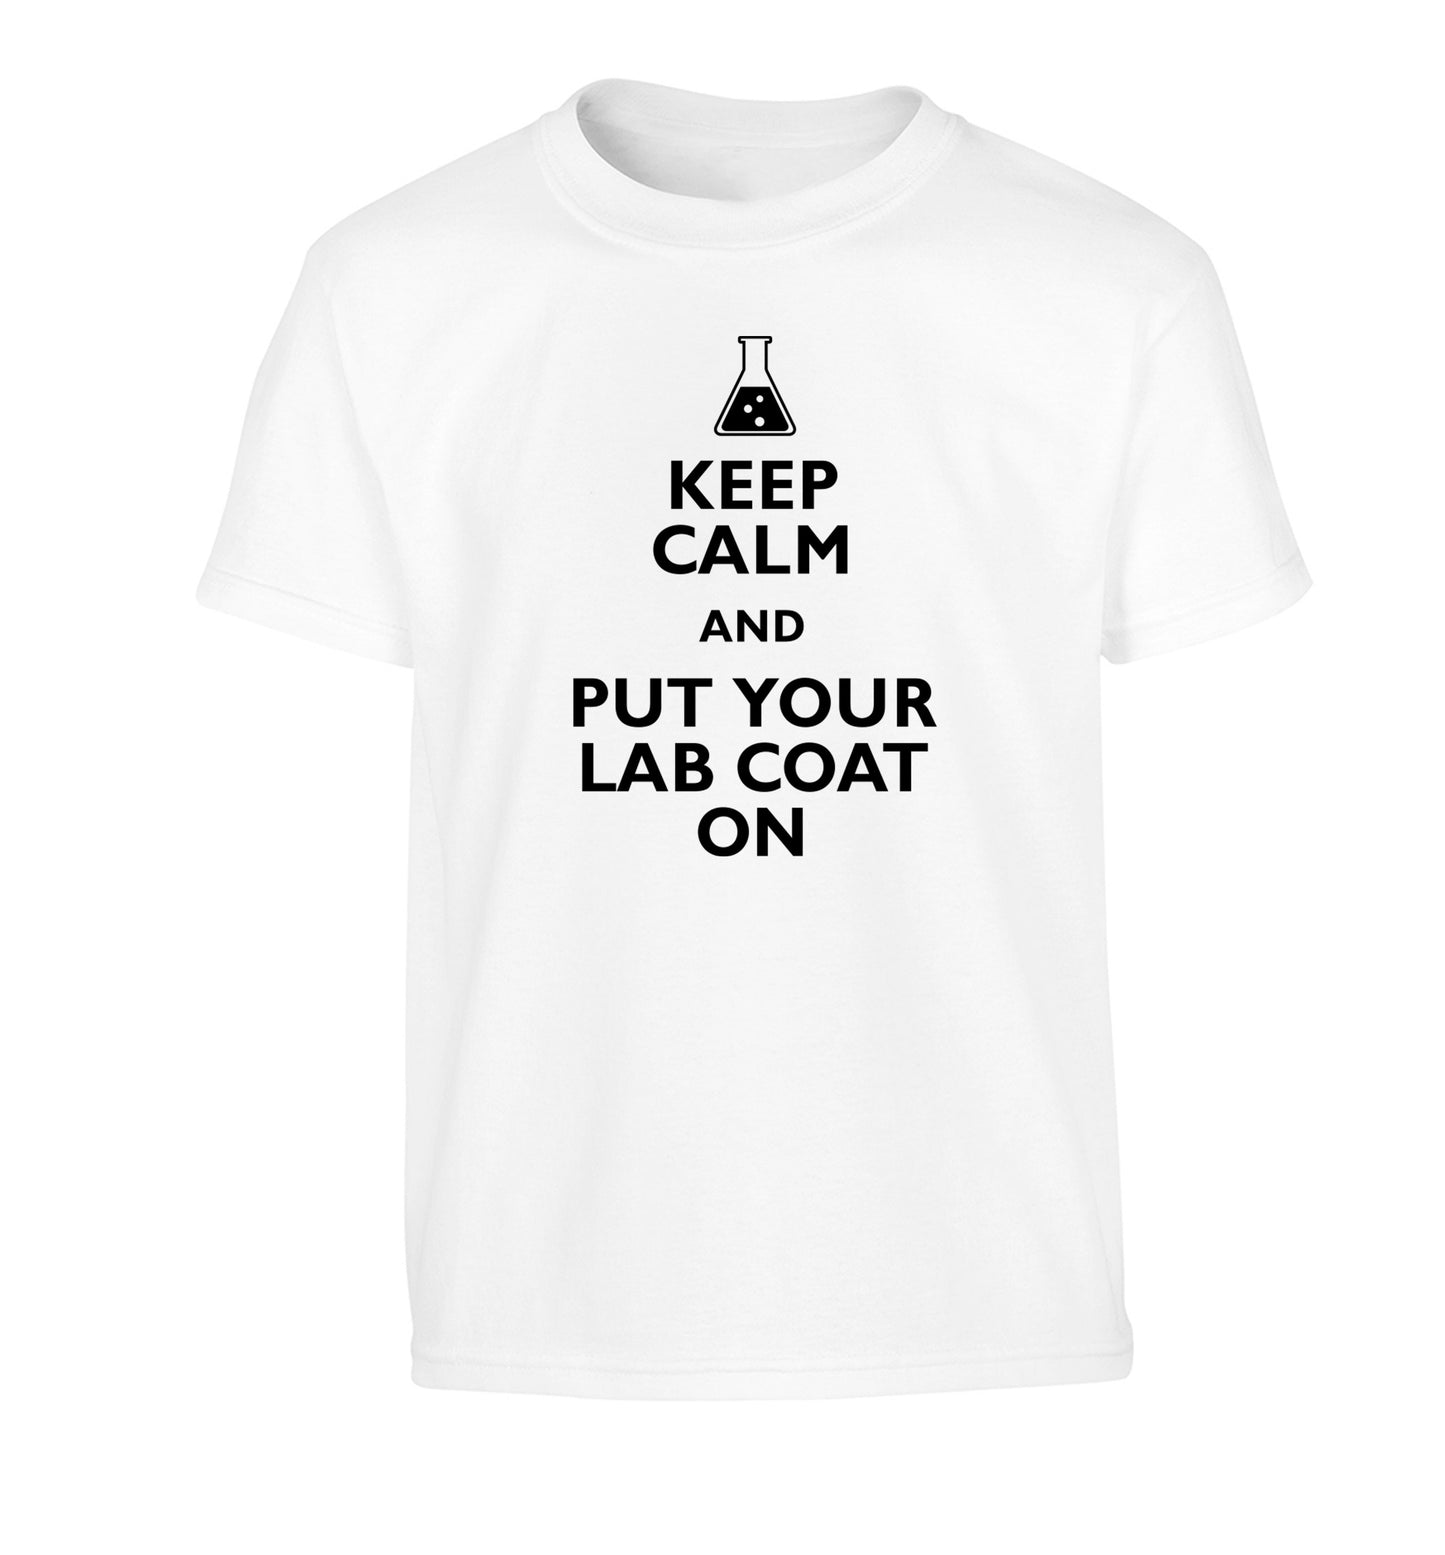 Keep calm and put your lab coat on Children's white Tshirt 12-14 Years